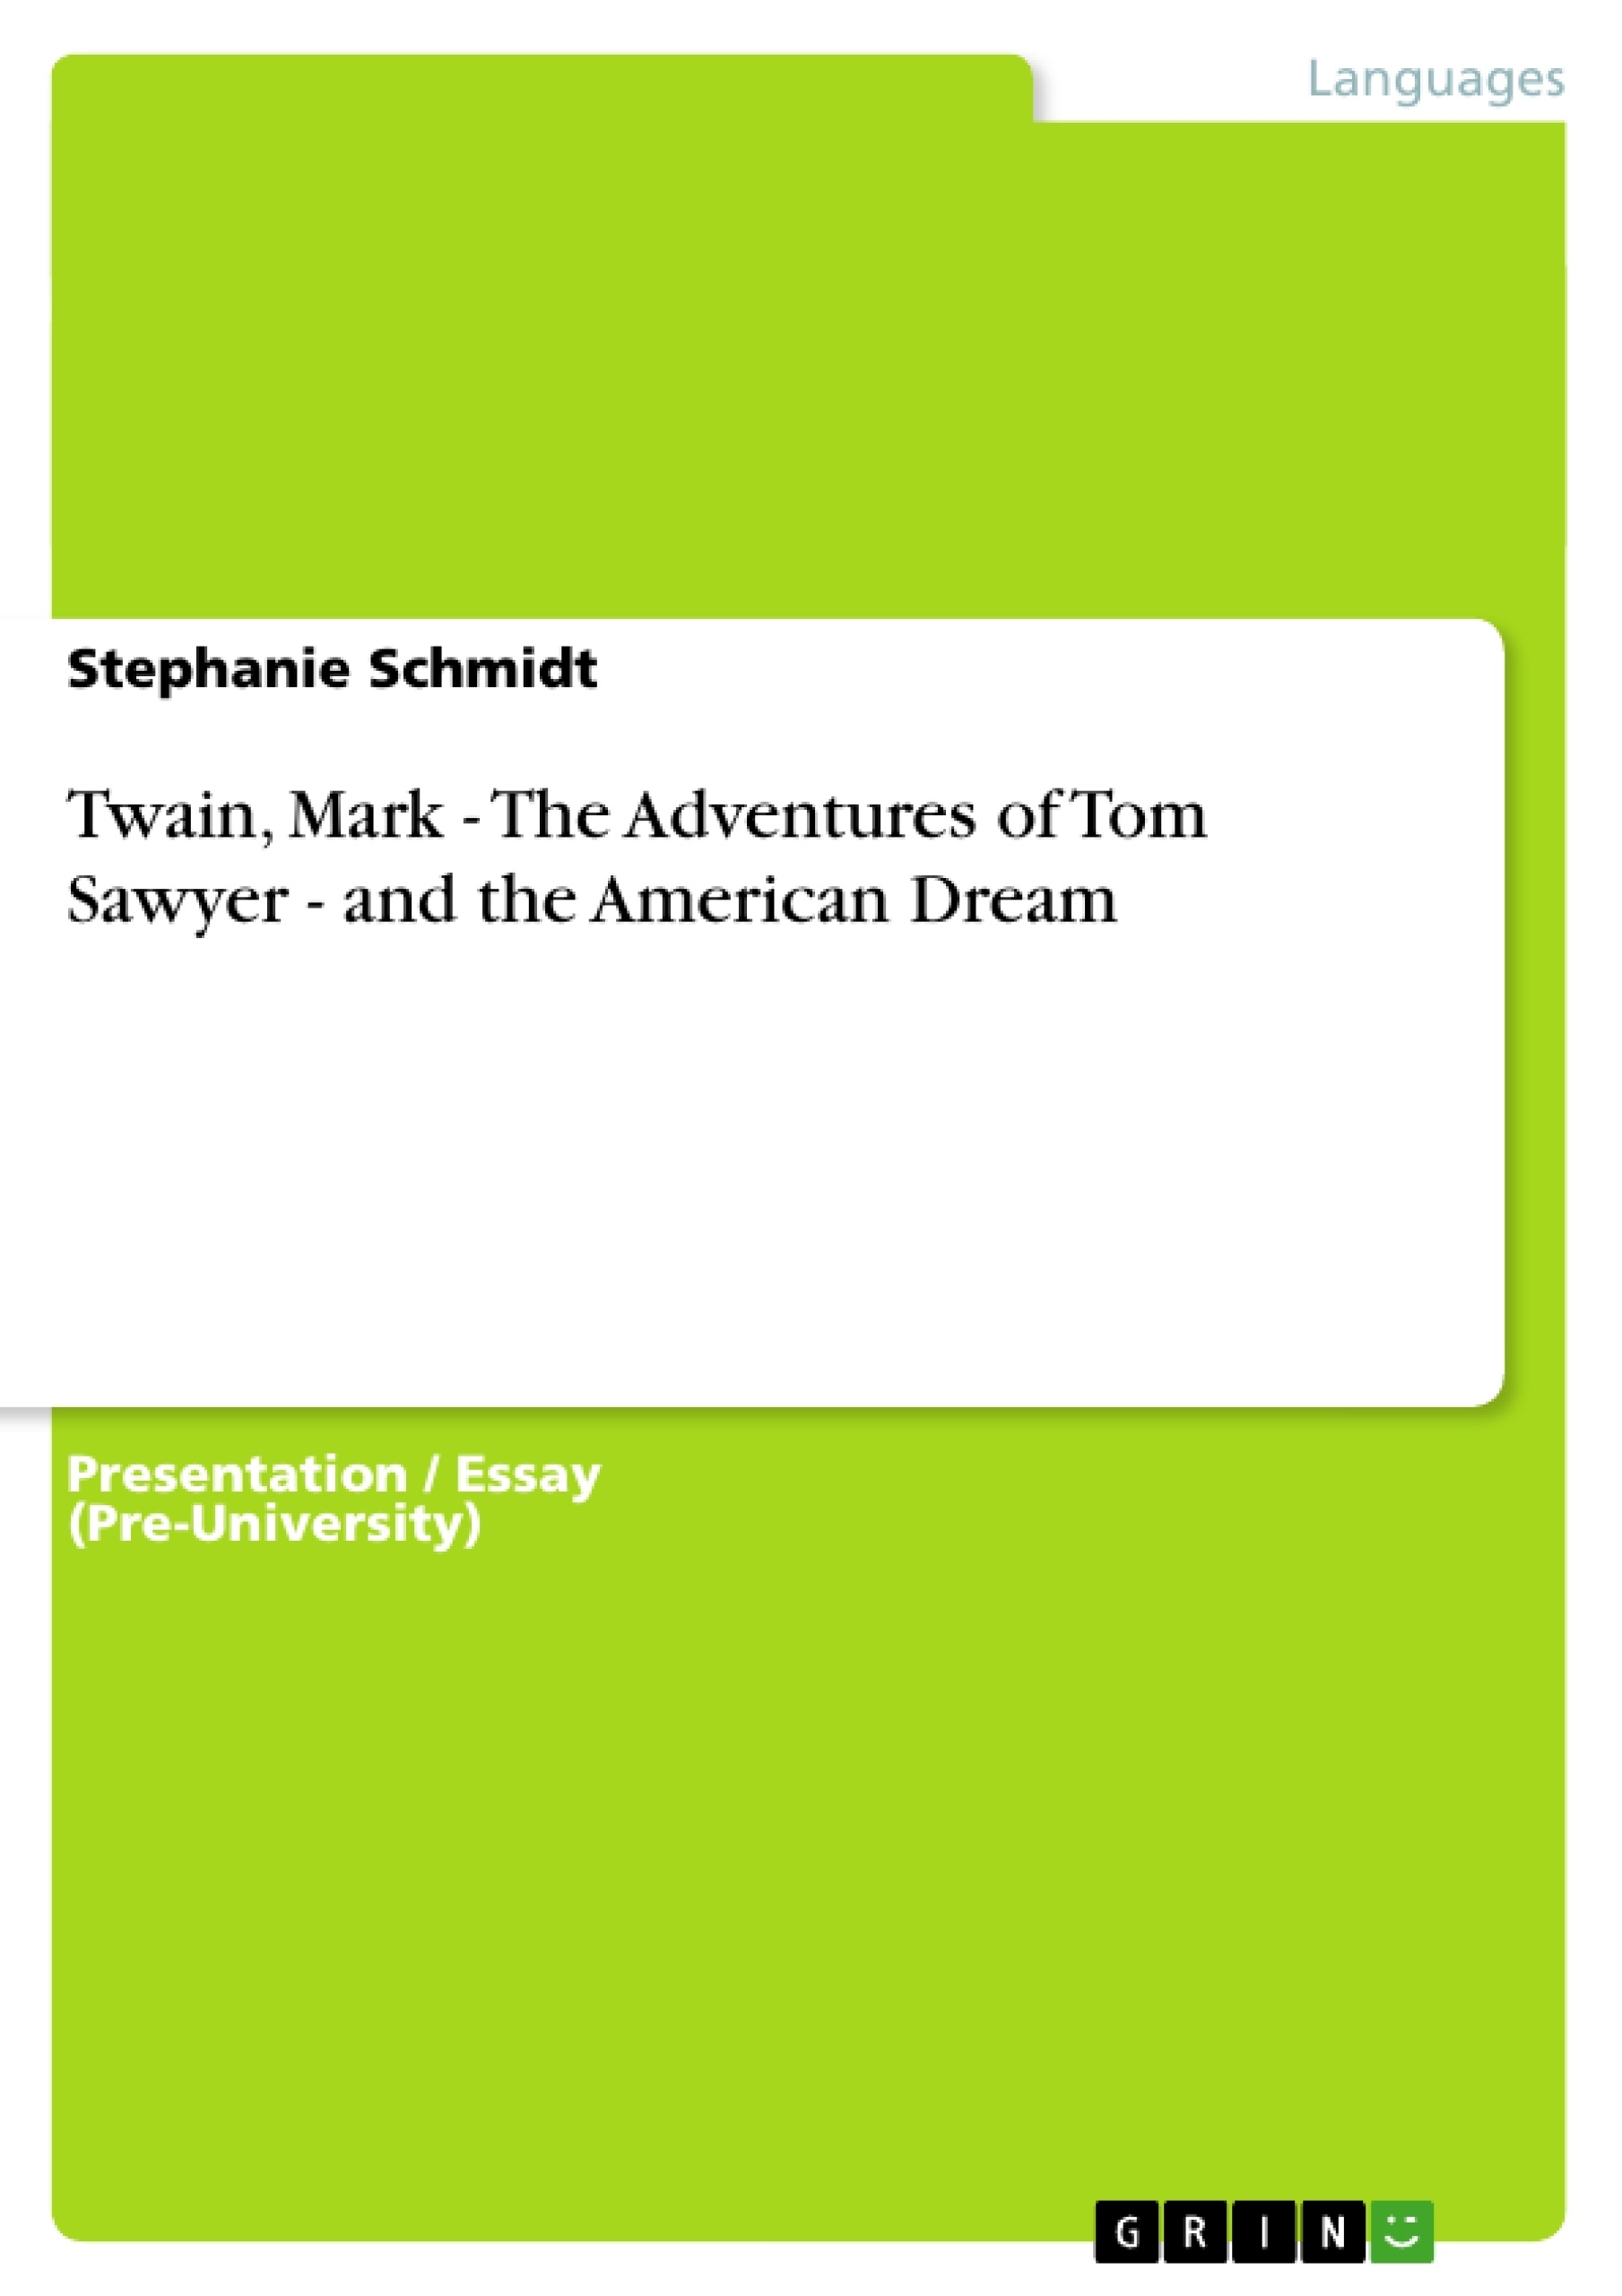 Titre: Twain, Mark - The Adventures of Tom Sawyer - and the American Dream